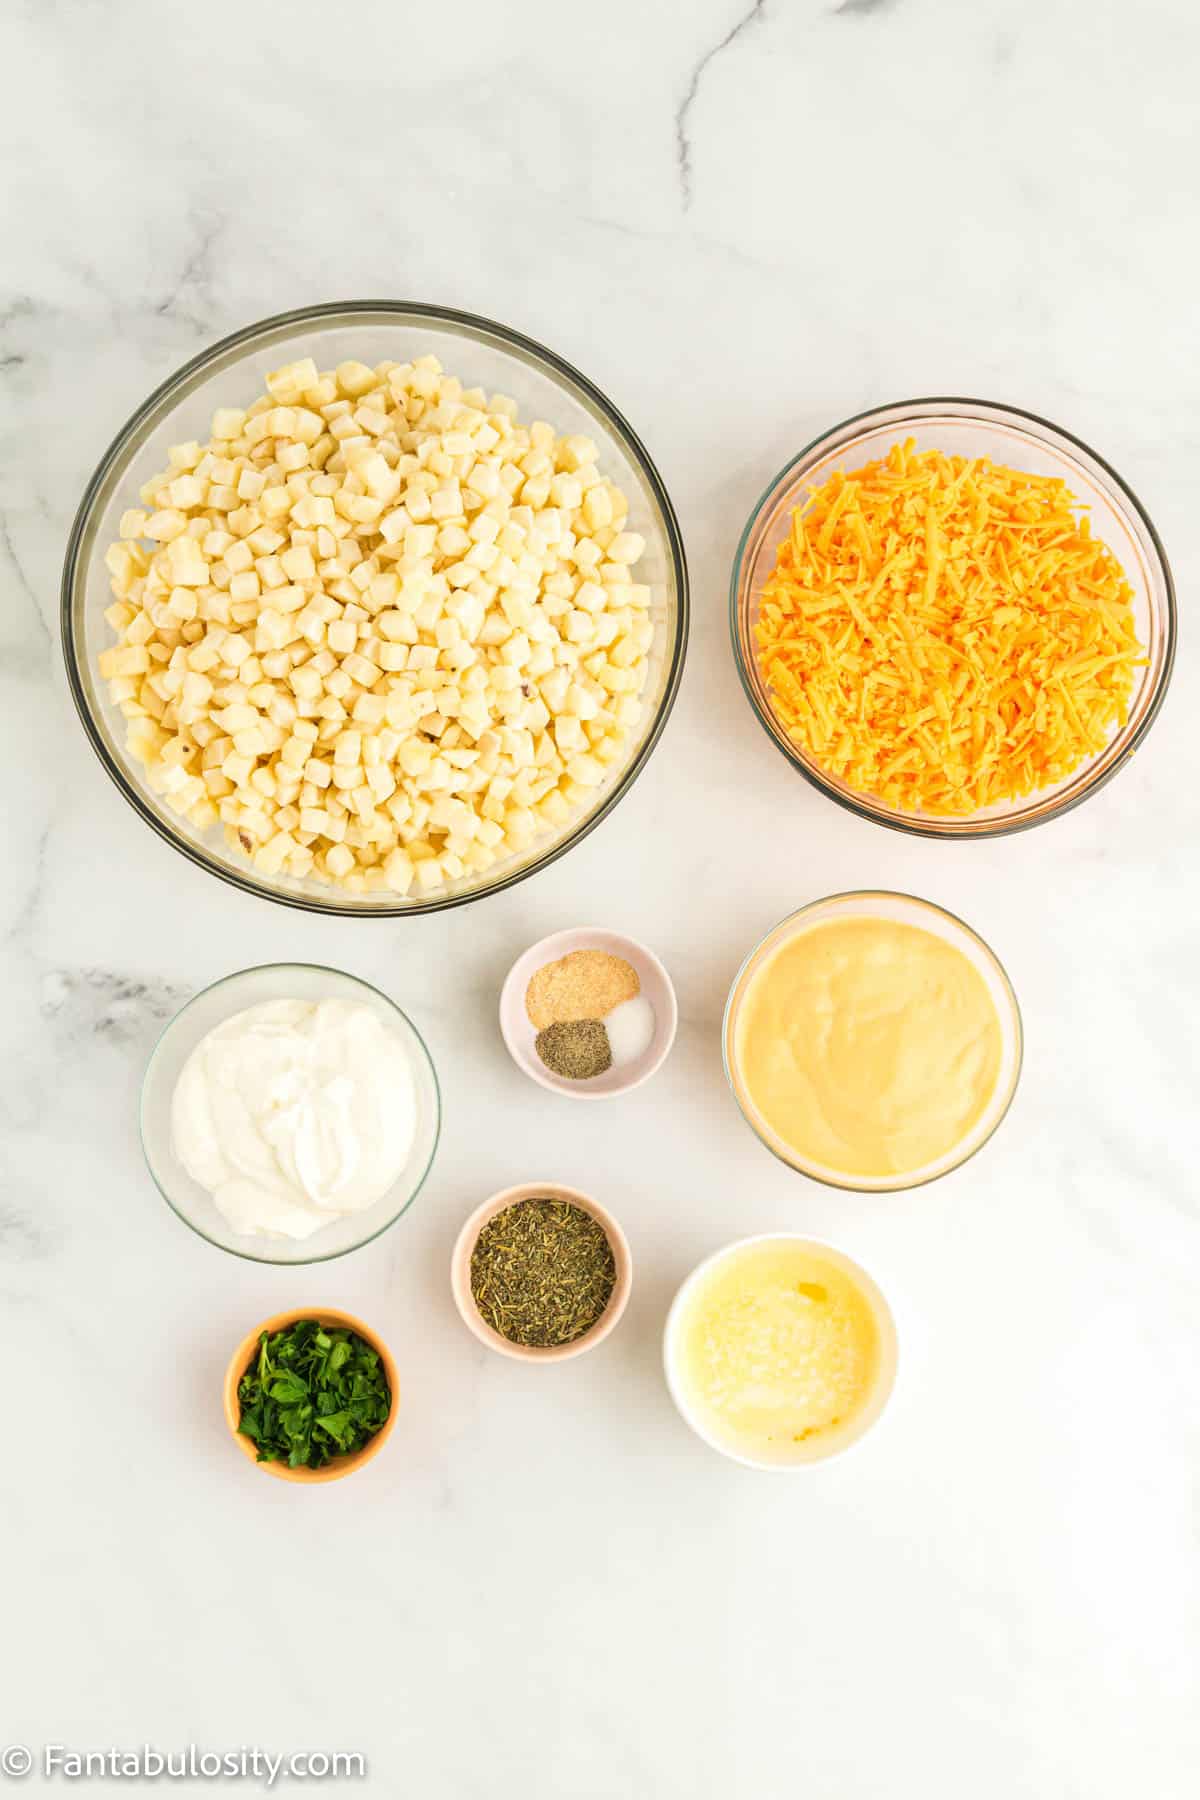 Diced hashbrown potatoes, shredded cheddar cheese and several other bowls of ingredients are displayed on a white marble background